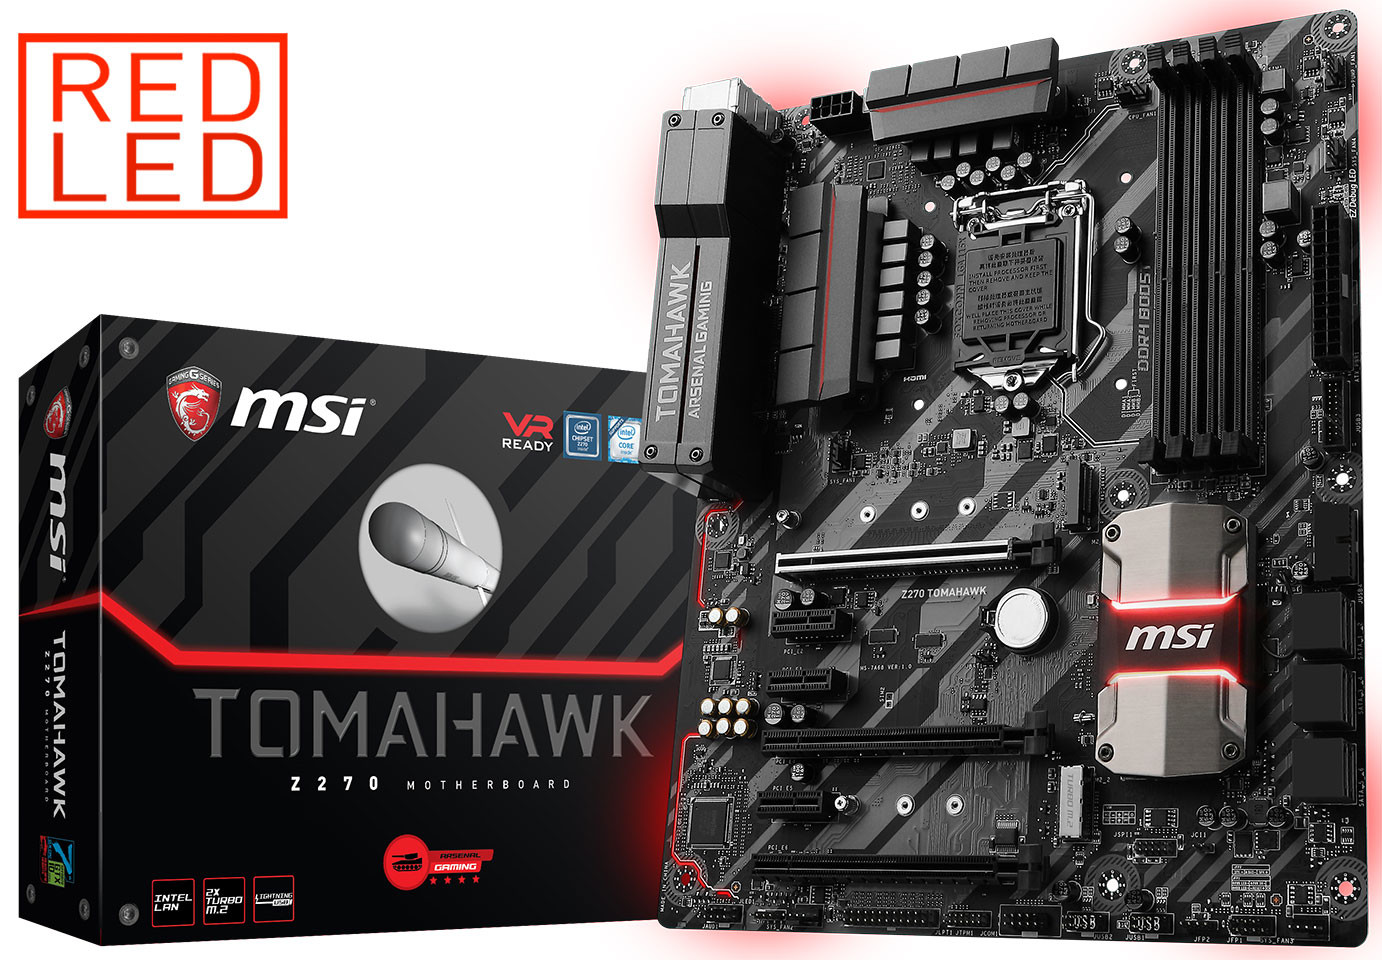 MSI Announces its Intel 200-series Motherboard Family | TechPowerUp Forums